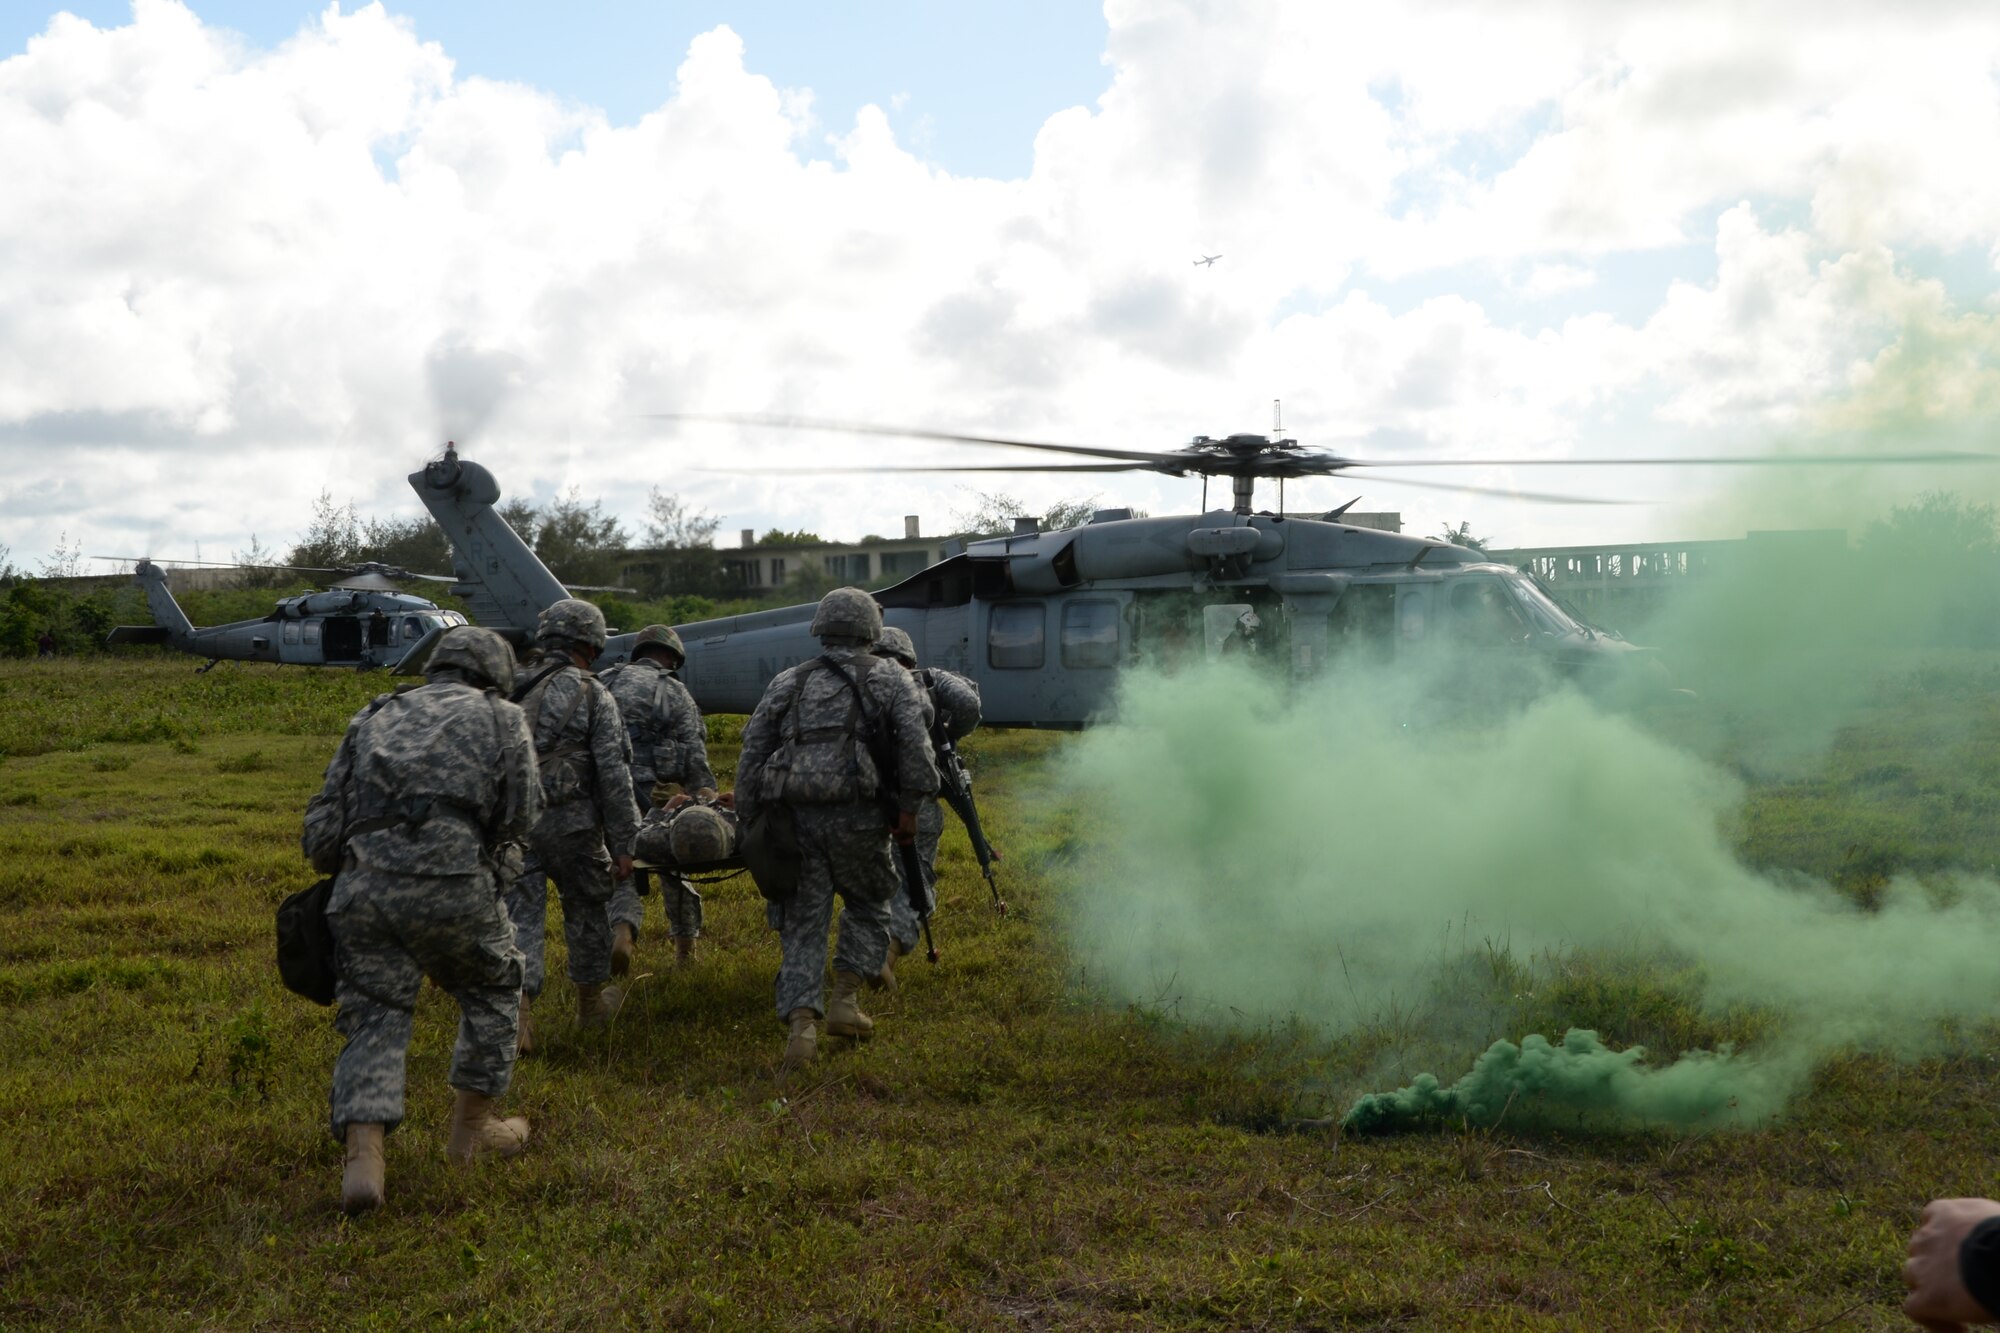 U.S. Army Reserve 797th Engineer Company (Vertical) Soldiers carry a litter to a MH-60S Knighthawk during a training exercise June 11, 2014, on Andersen South, Guam. The training was held to improve the soldiers’ skills for real world contingencies conducted with the help of members of the U.S.  Navy Helicopter Sea Combat Squadron 25 based at Andersen Air Force Base, Guam.  (U.S. Air Force photo by Airman 1st Class Amanda Morris/Released)